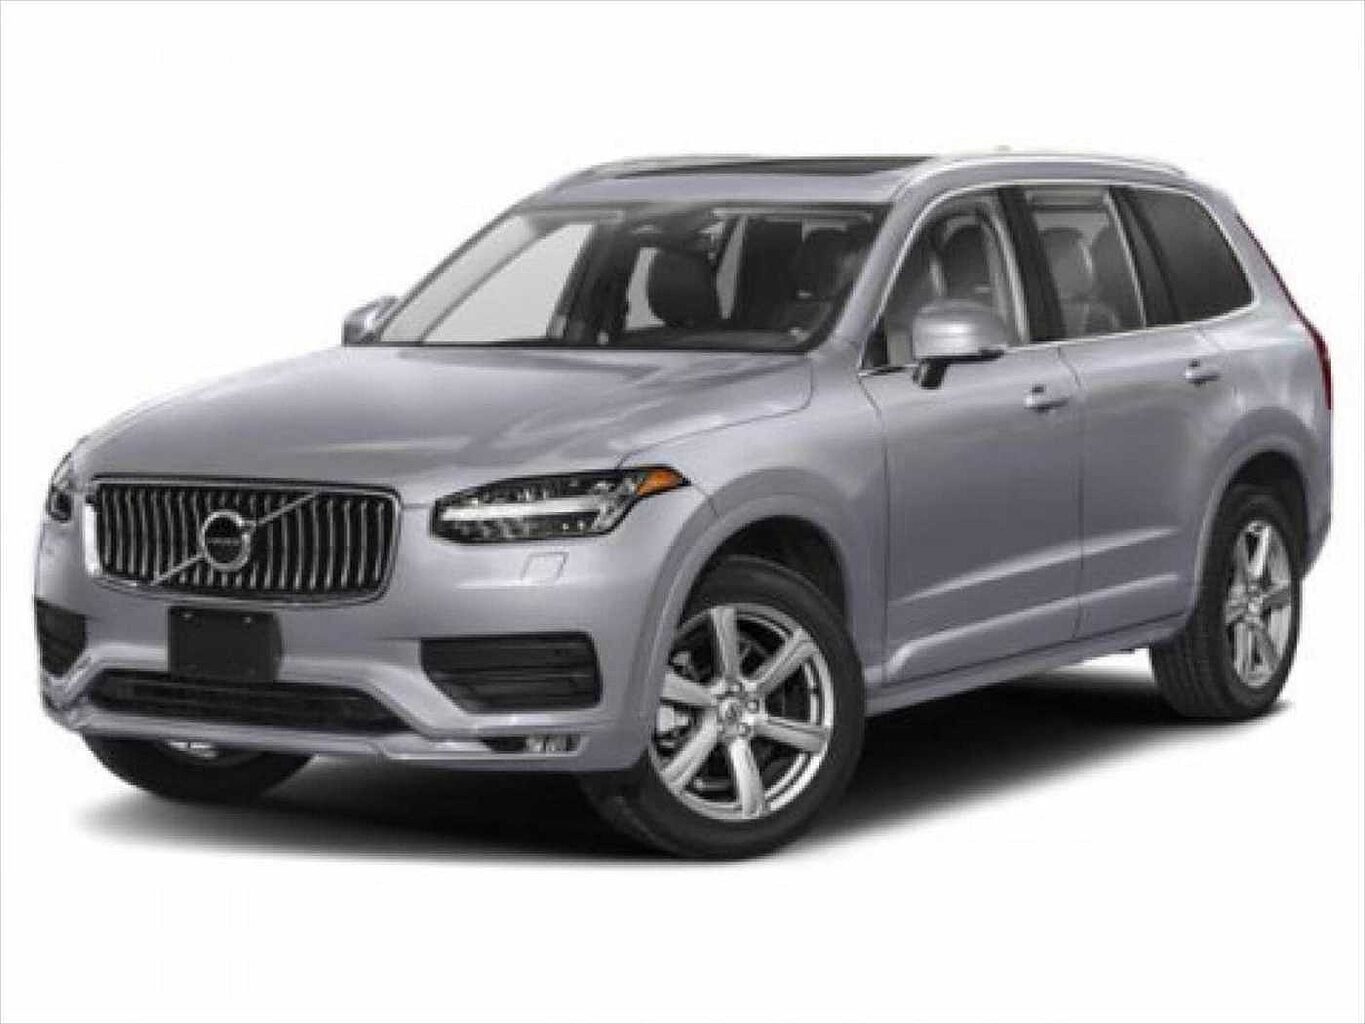 Pre-owned Volvo XC90 Cars for Sale on Certified by Volvo | Volvo Car  Corporation (or its affiliates or licensors)